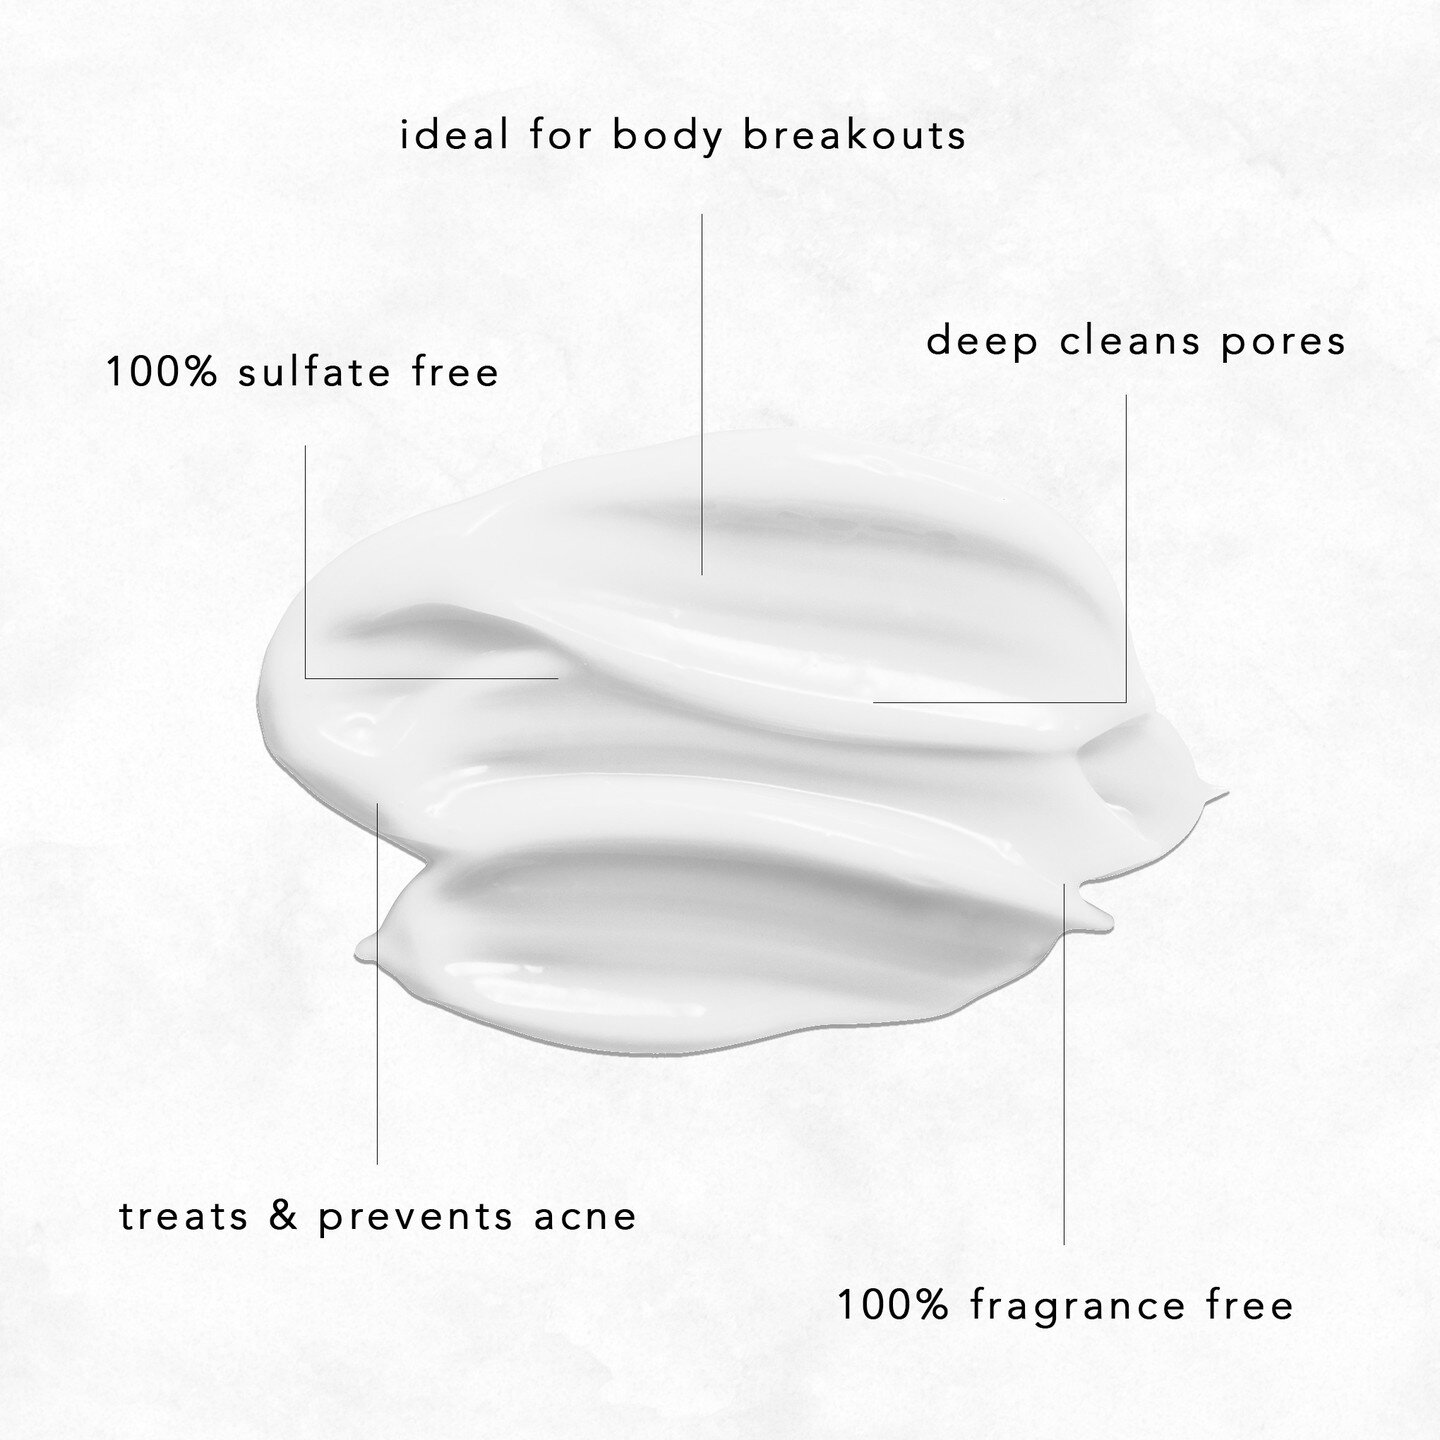 There&rsquo;s so much to love about our Salicylic Face &amp; Body Wash! Our formula includes ingredients that are 100% sulfate and fragrance free, deep cleans pores, and treats and prevents acne.
#NudeLuxeRx